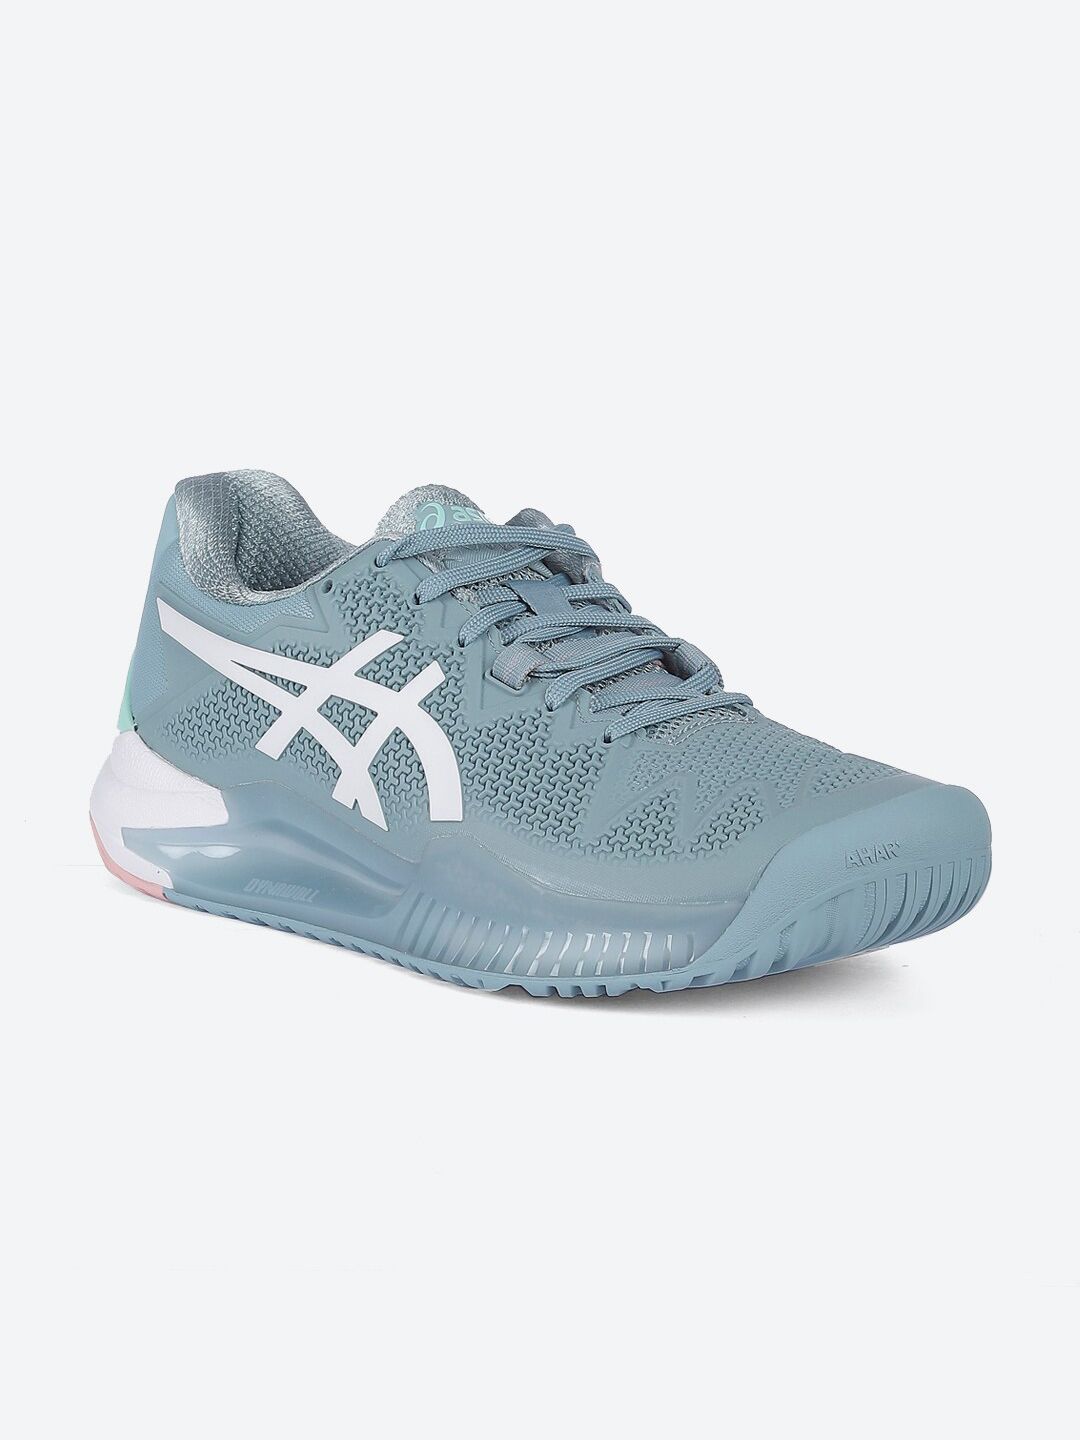 ASICS Women Blue Sports Shoes Price in India